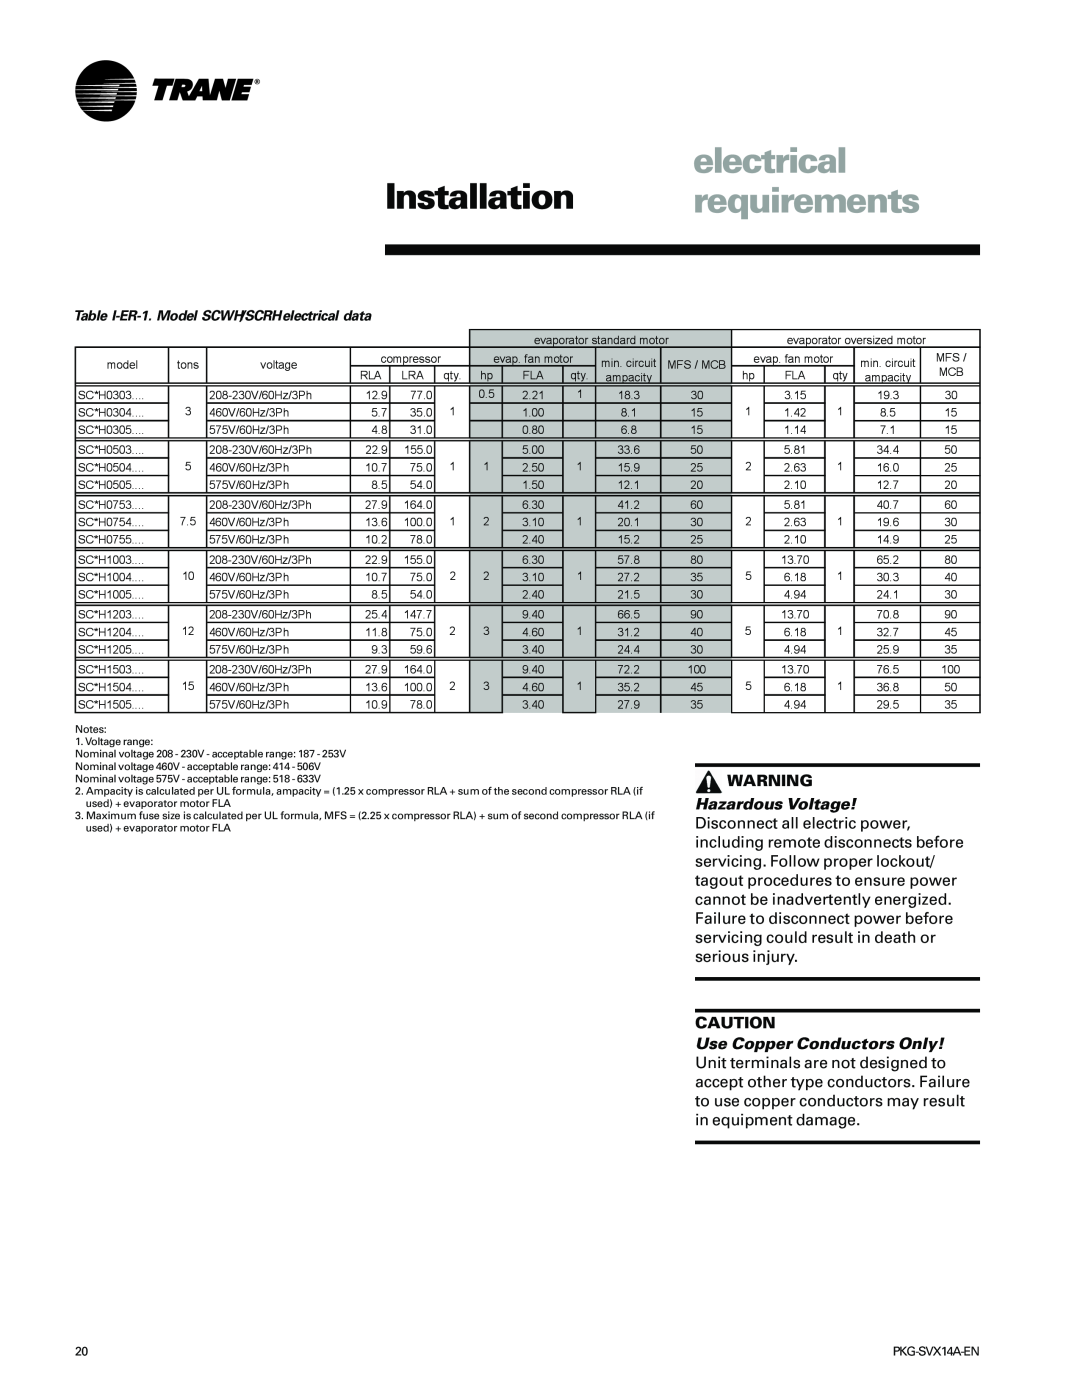 Trane manual Installation requirements, Hazardous Voltage, Table I-ER-1.Model SCWH/SCRHelectrical data 